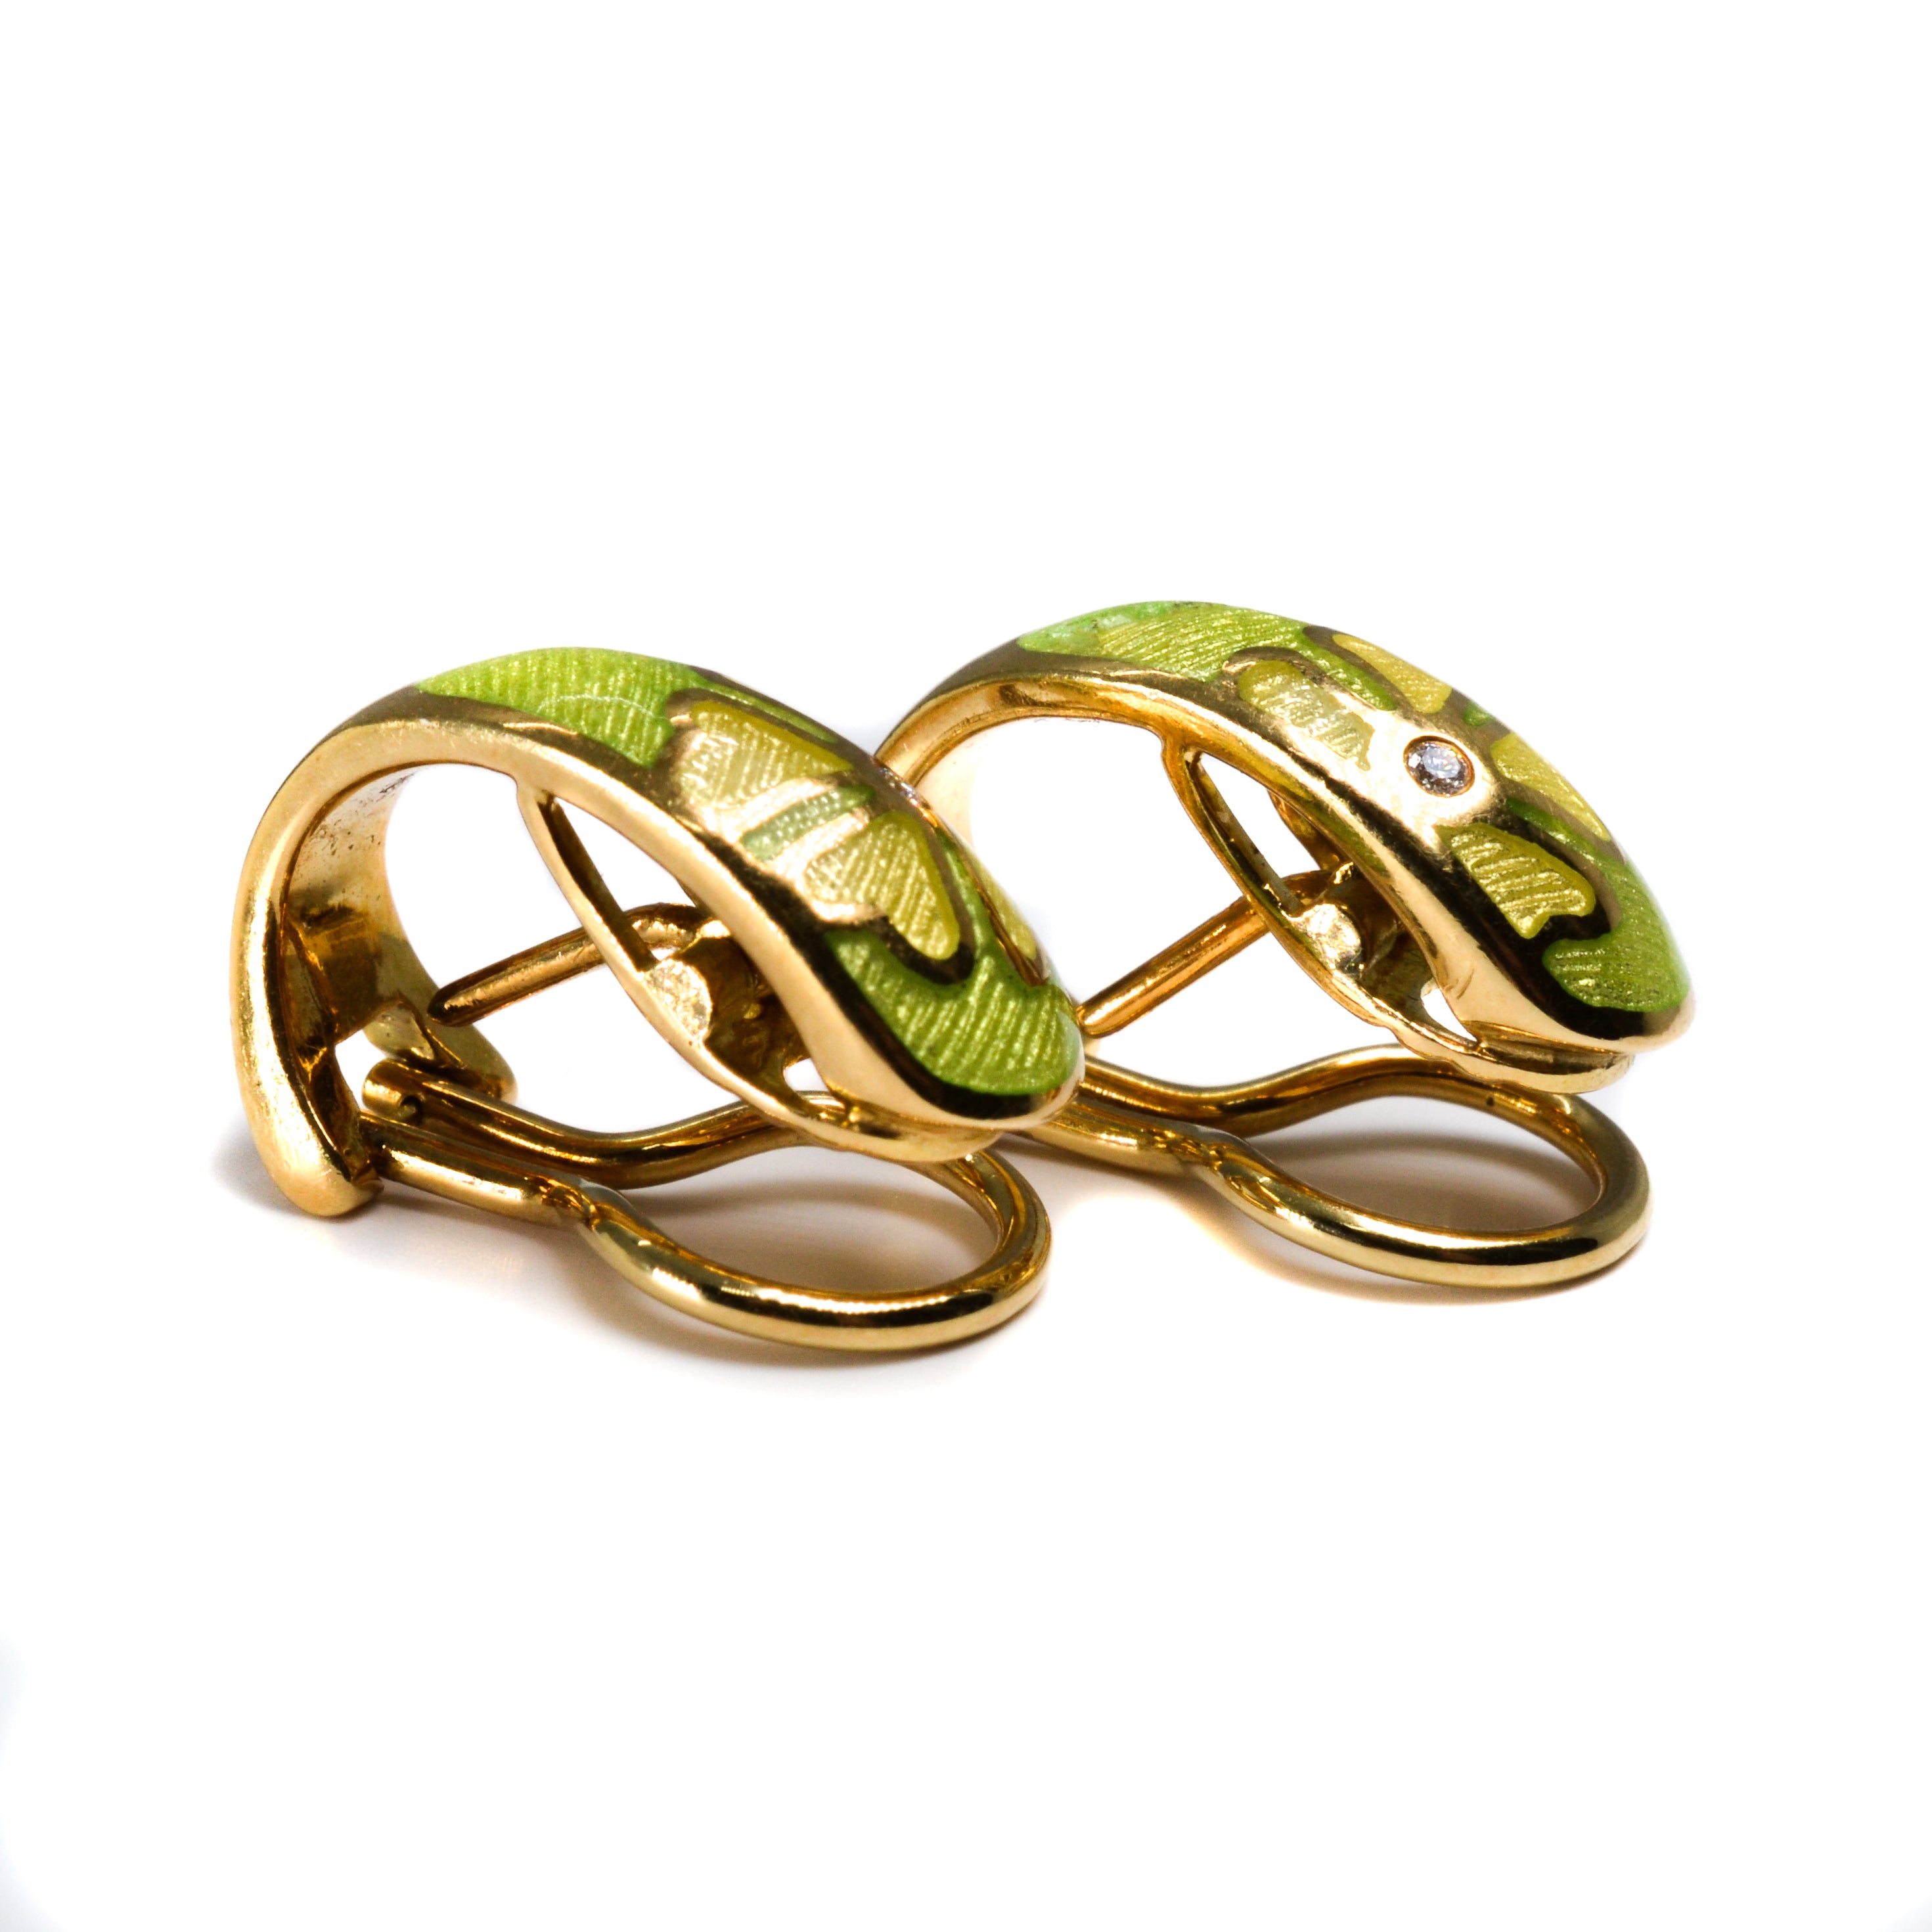 18kt Yellow Gold Faberge Lime Green Enamel Earrings with Diamonds